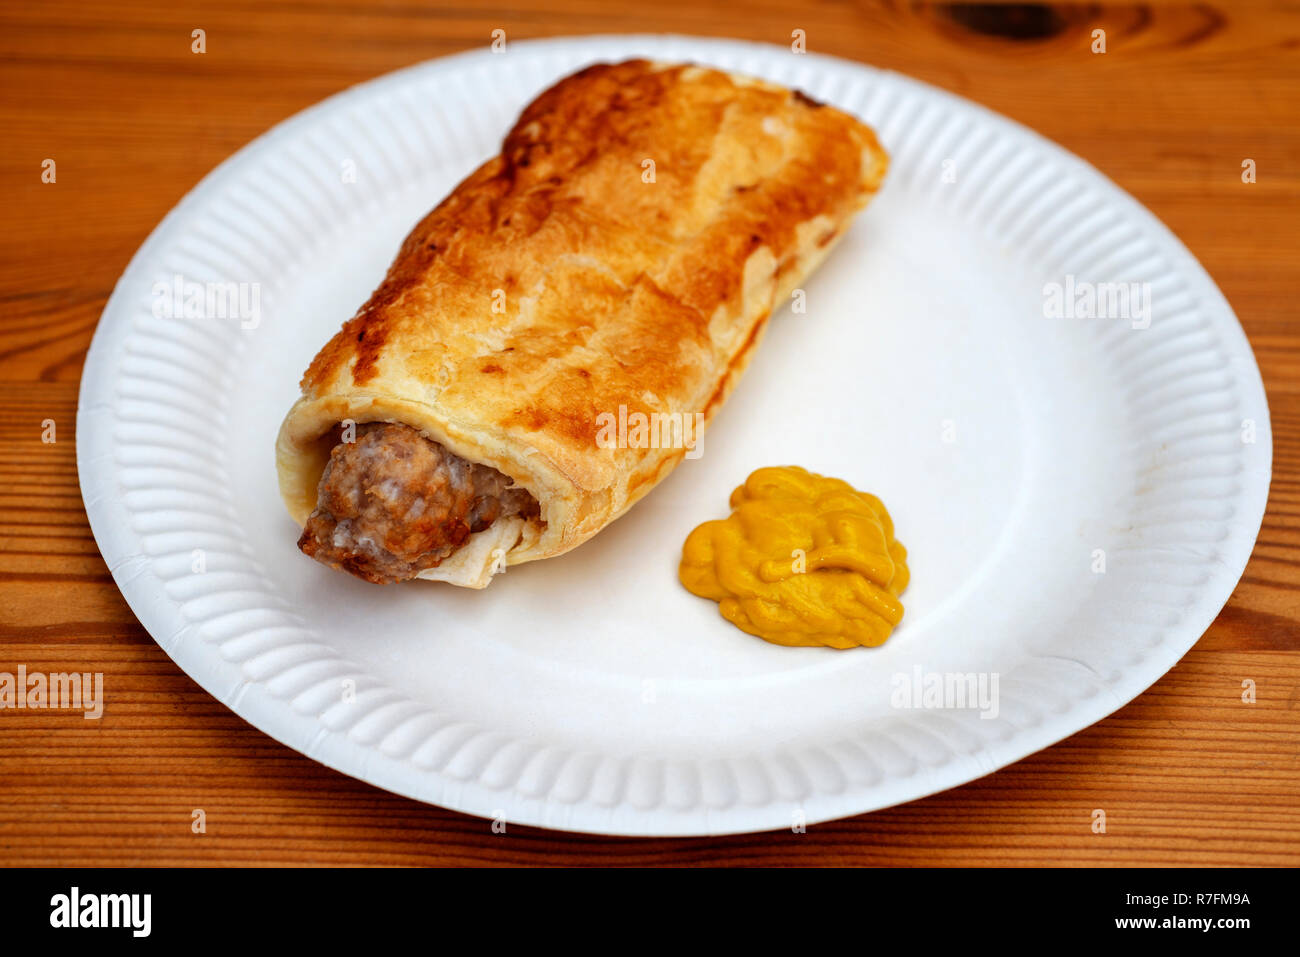 Homemade sausage roll with English mustard Stock Photo